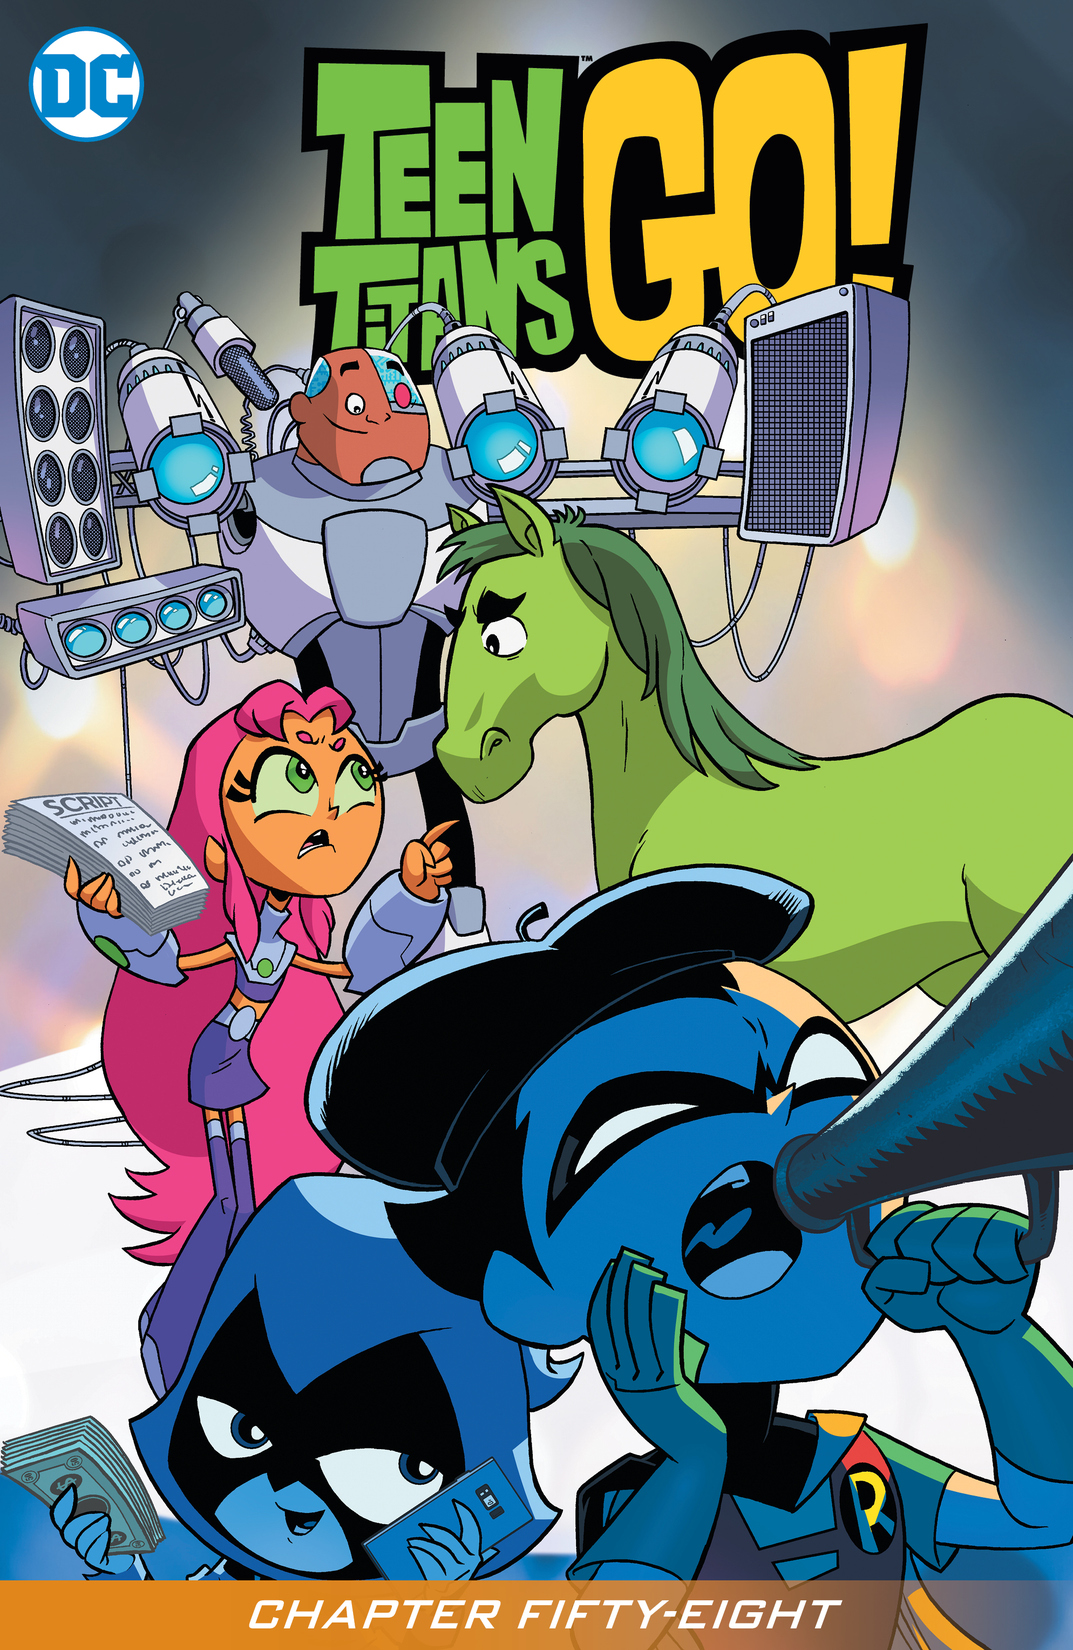 Teen Titans Go! (2013-) #58 preview images